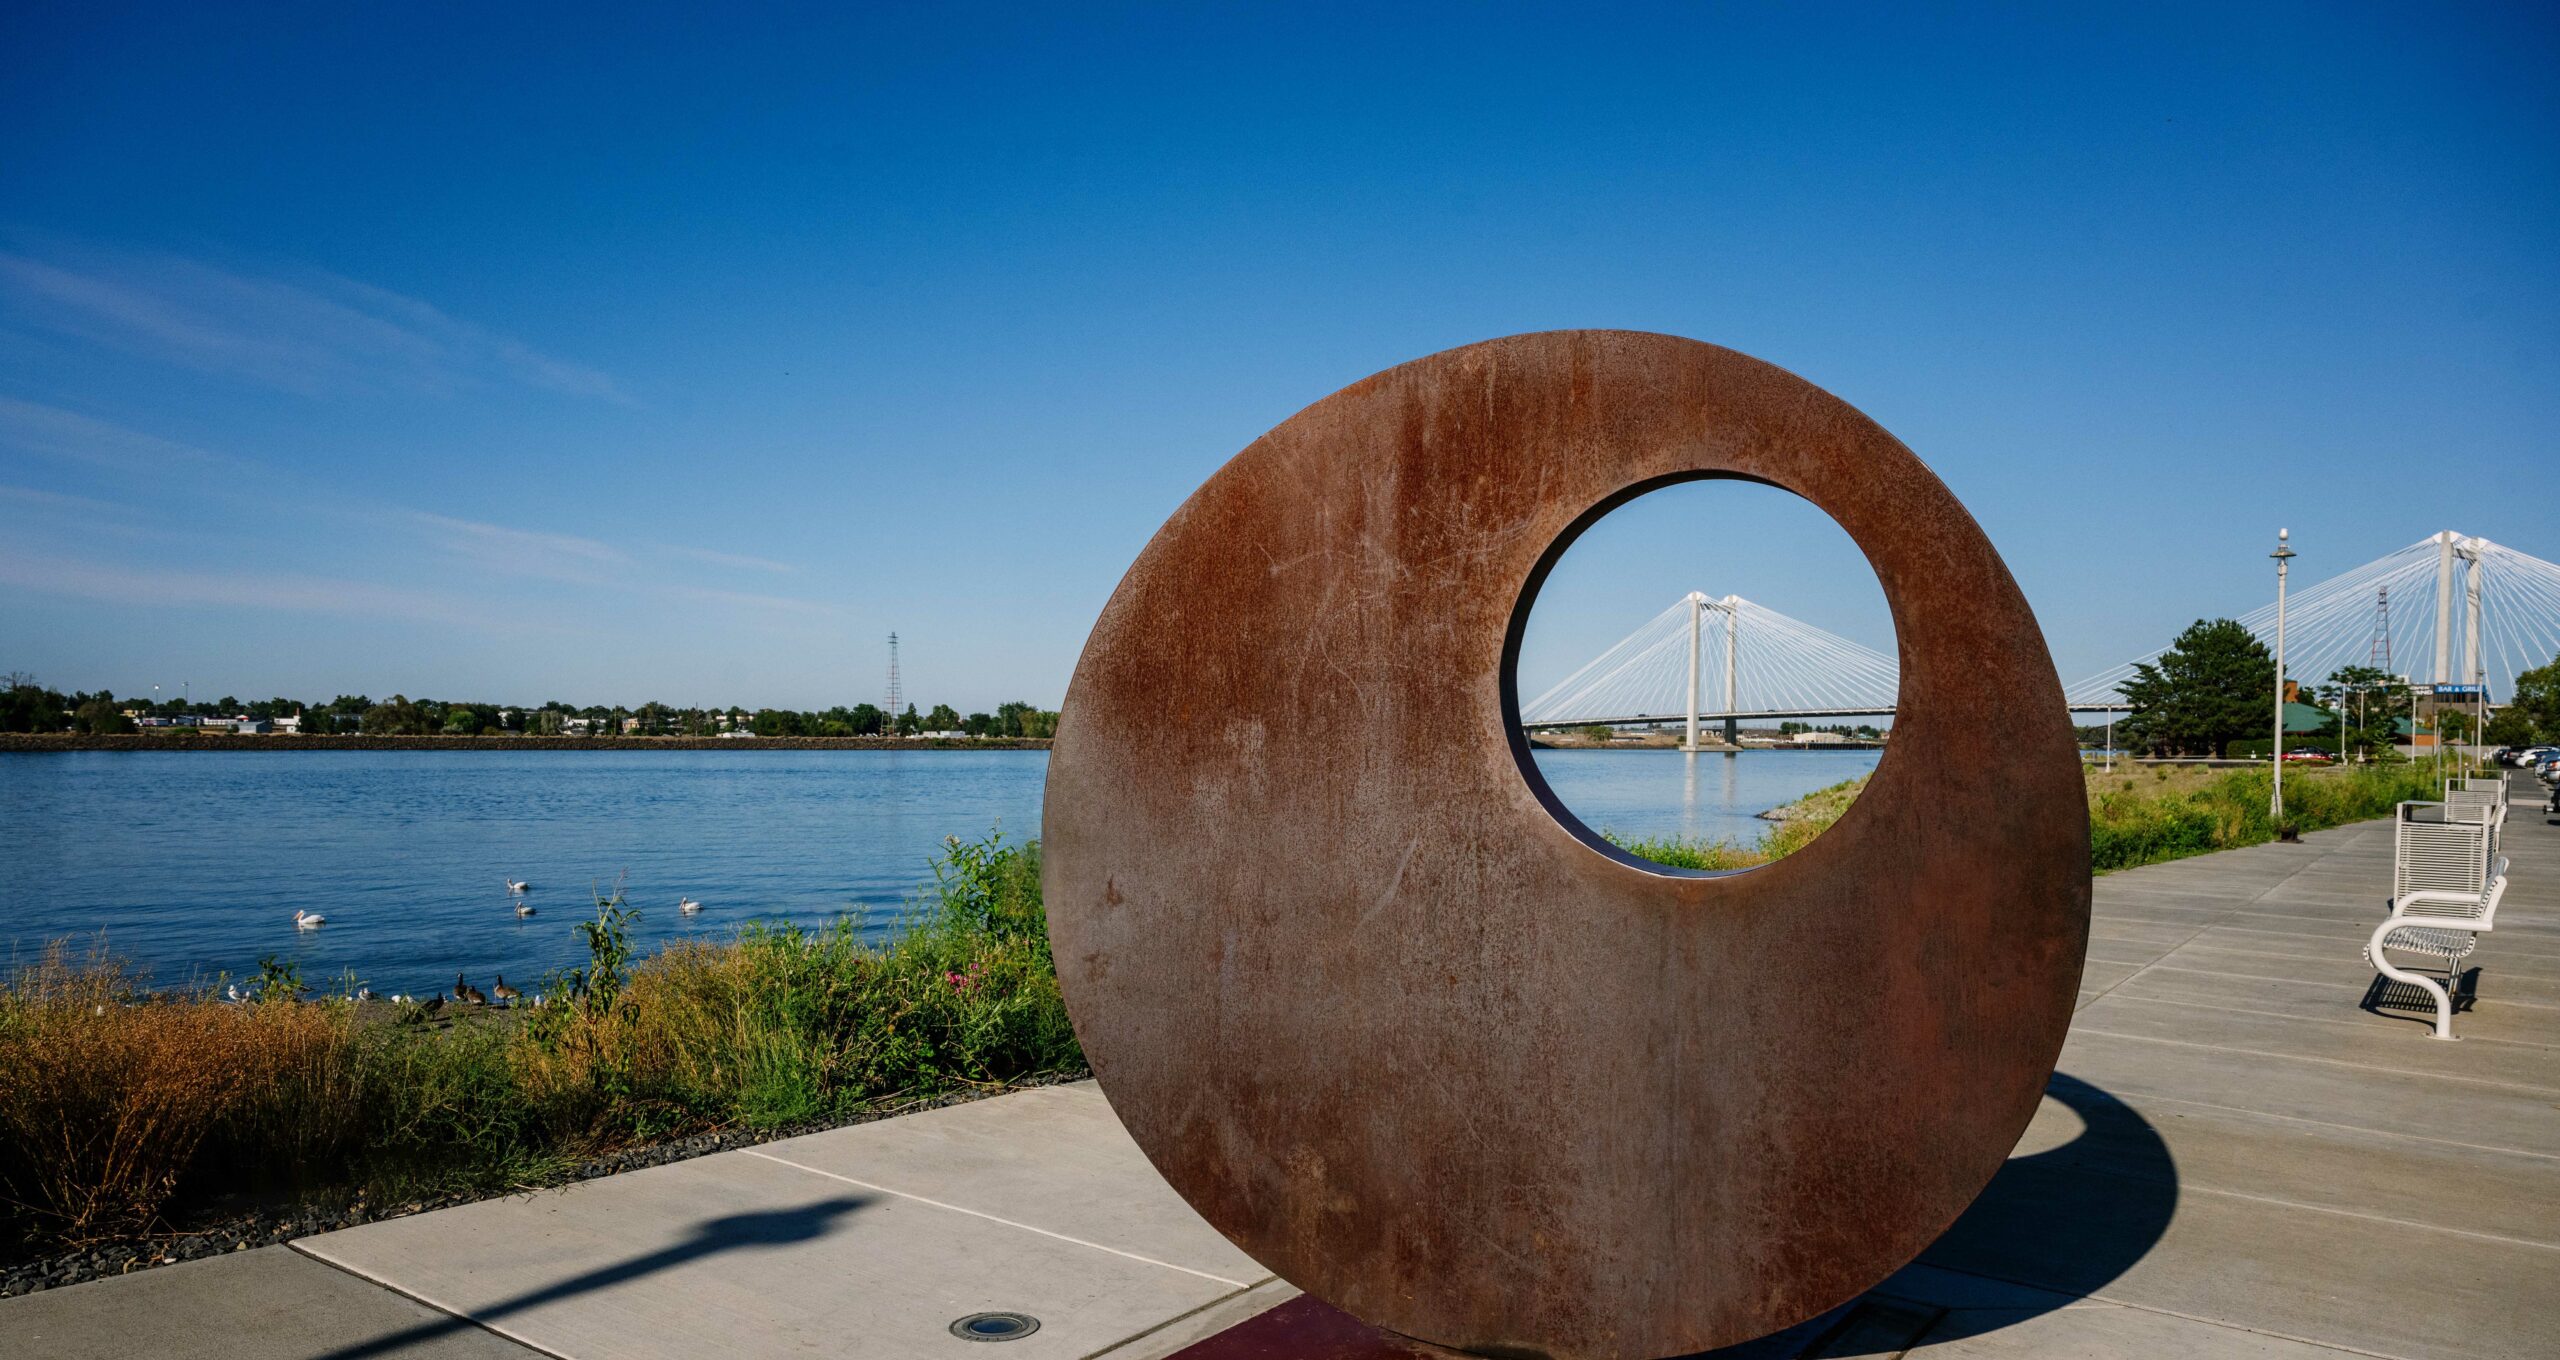 Mother of Reinvention II artwork on Clover Island with the Ed Hendler Bridge, also known as the Cable Bridge, in the distance.